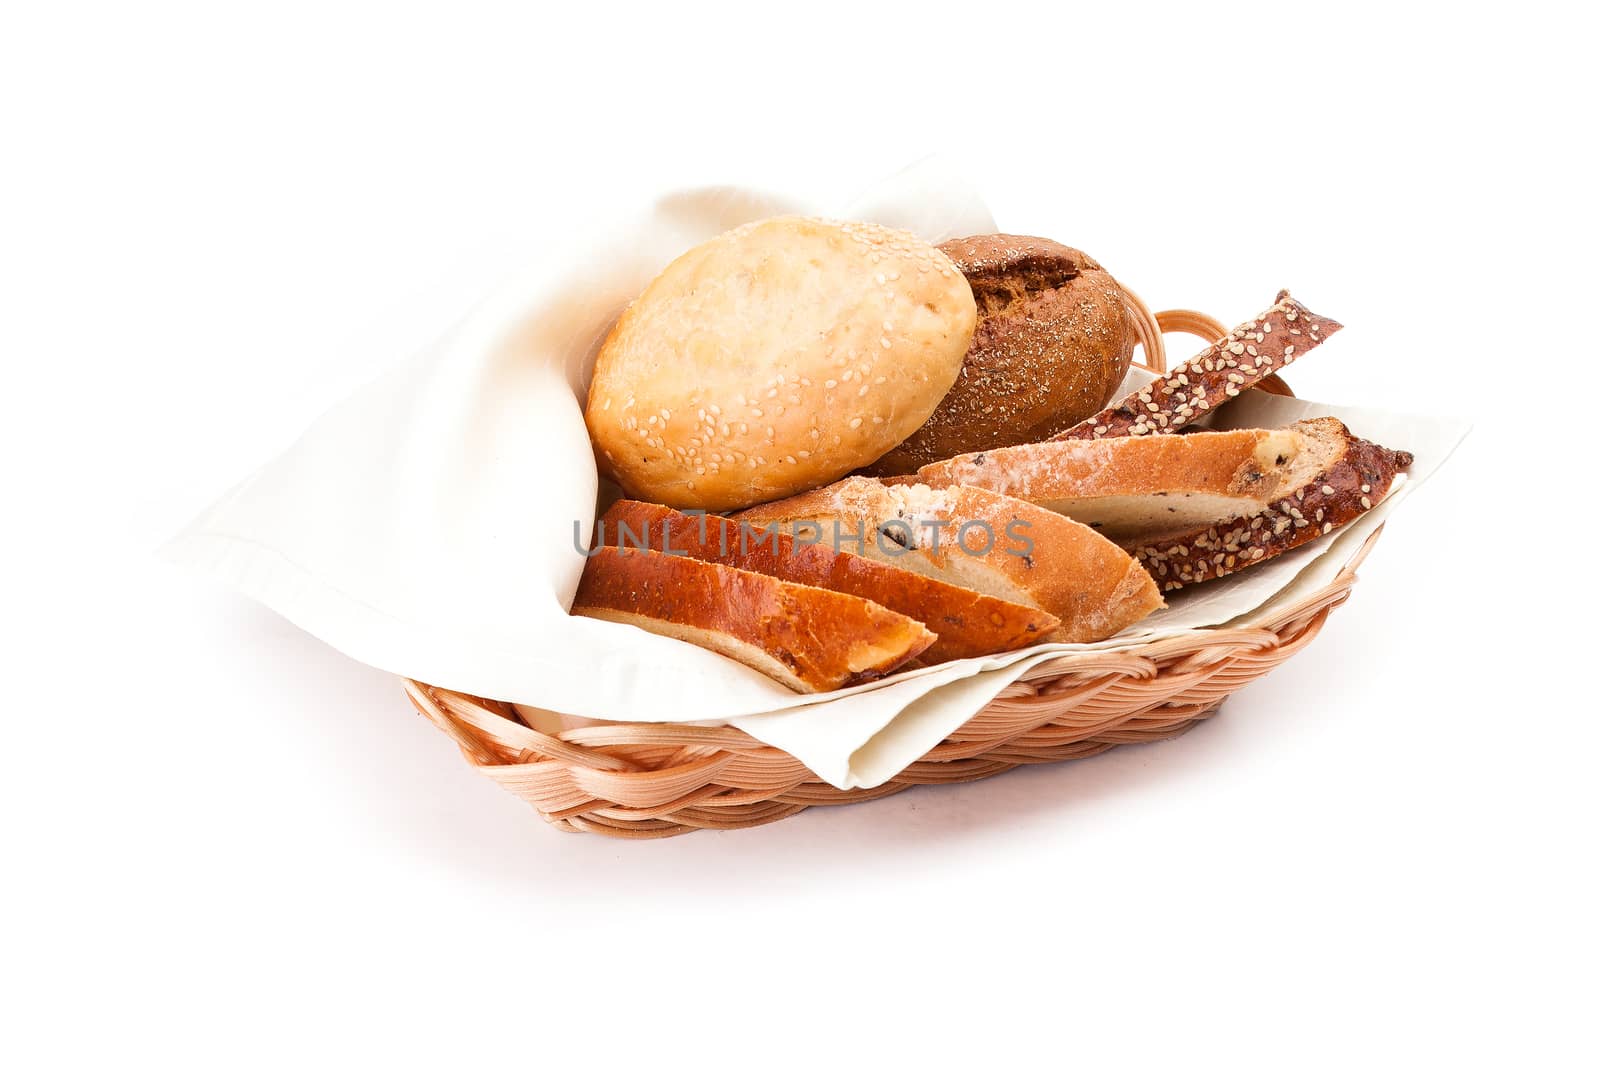 Newly-baked bun with sesame, piece of of white and black bread in a basket. Isolated on white background.